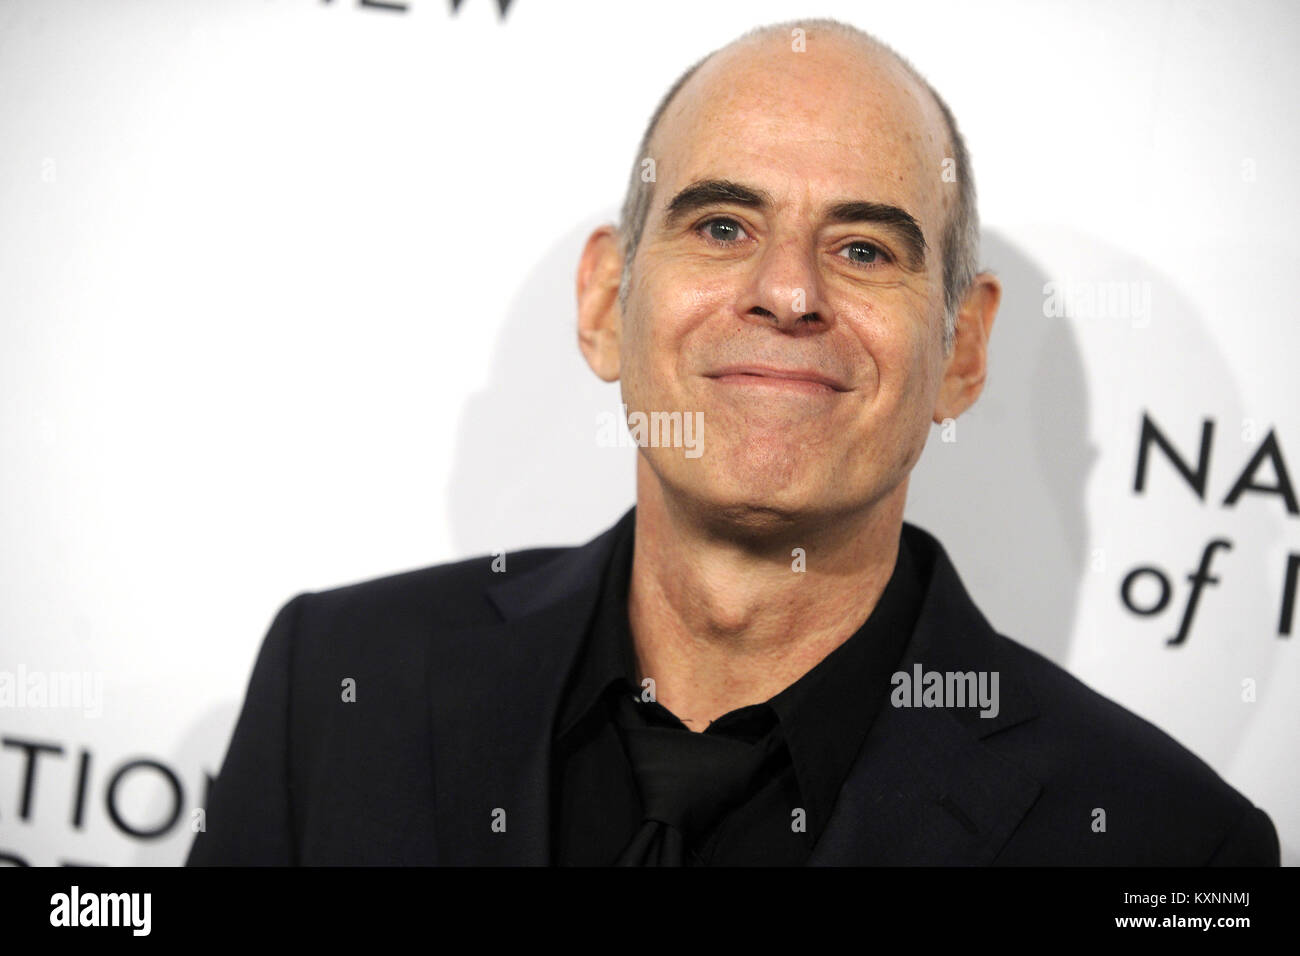 Samuel Maoz attends the National Board of Review Annual Awards Gala at Cipriani 42nd Street on January 9, 2018 in New York City. | Verwendung weltweit Stock Photo